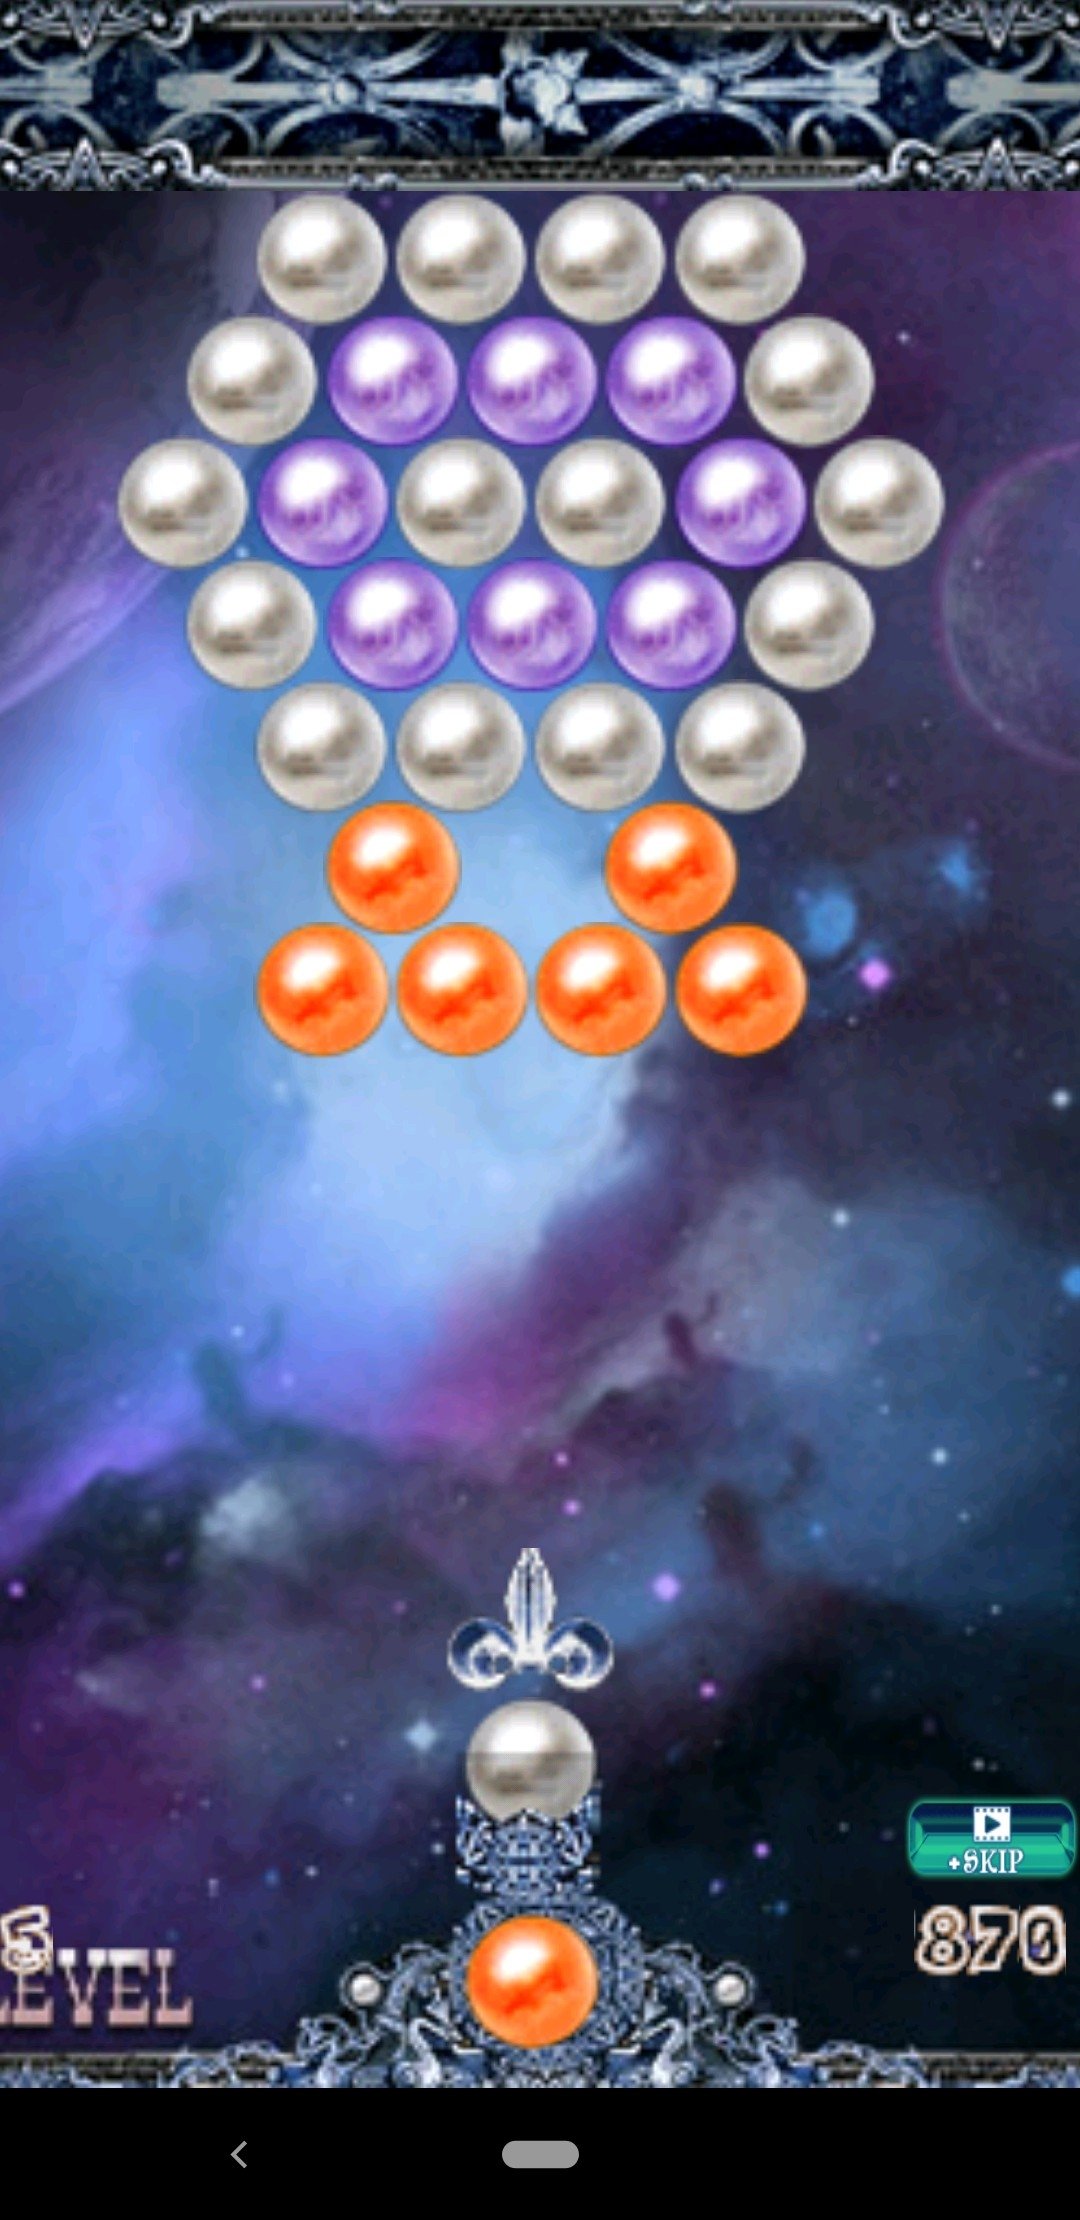 Shoot Bubble APK Download for Android Free